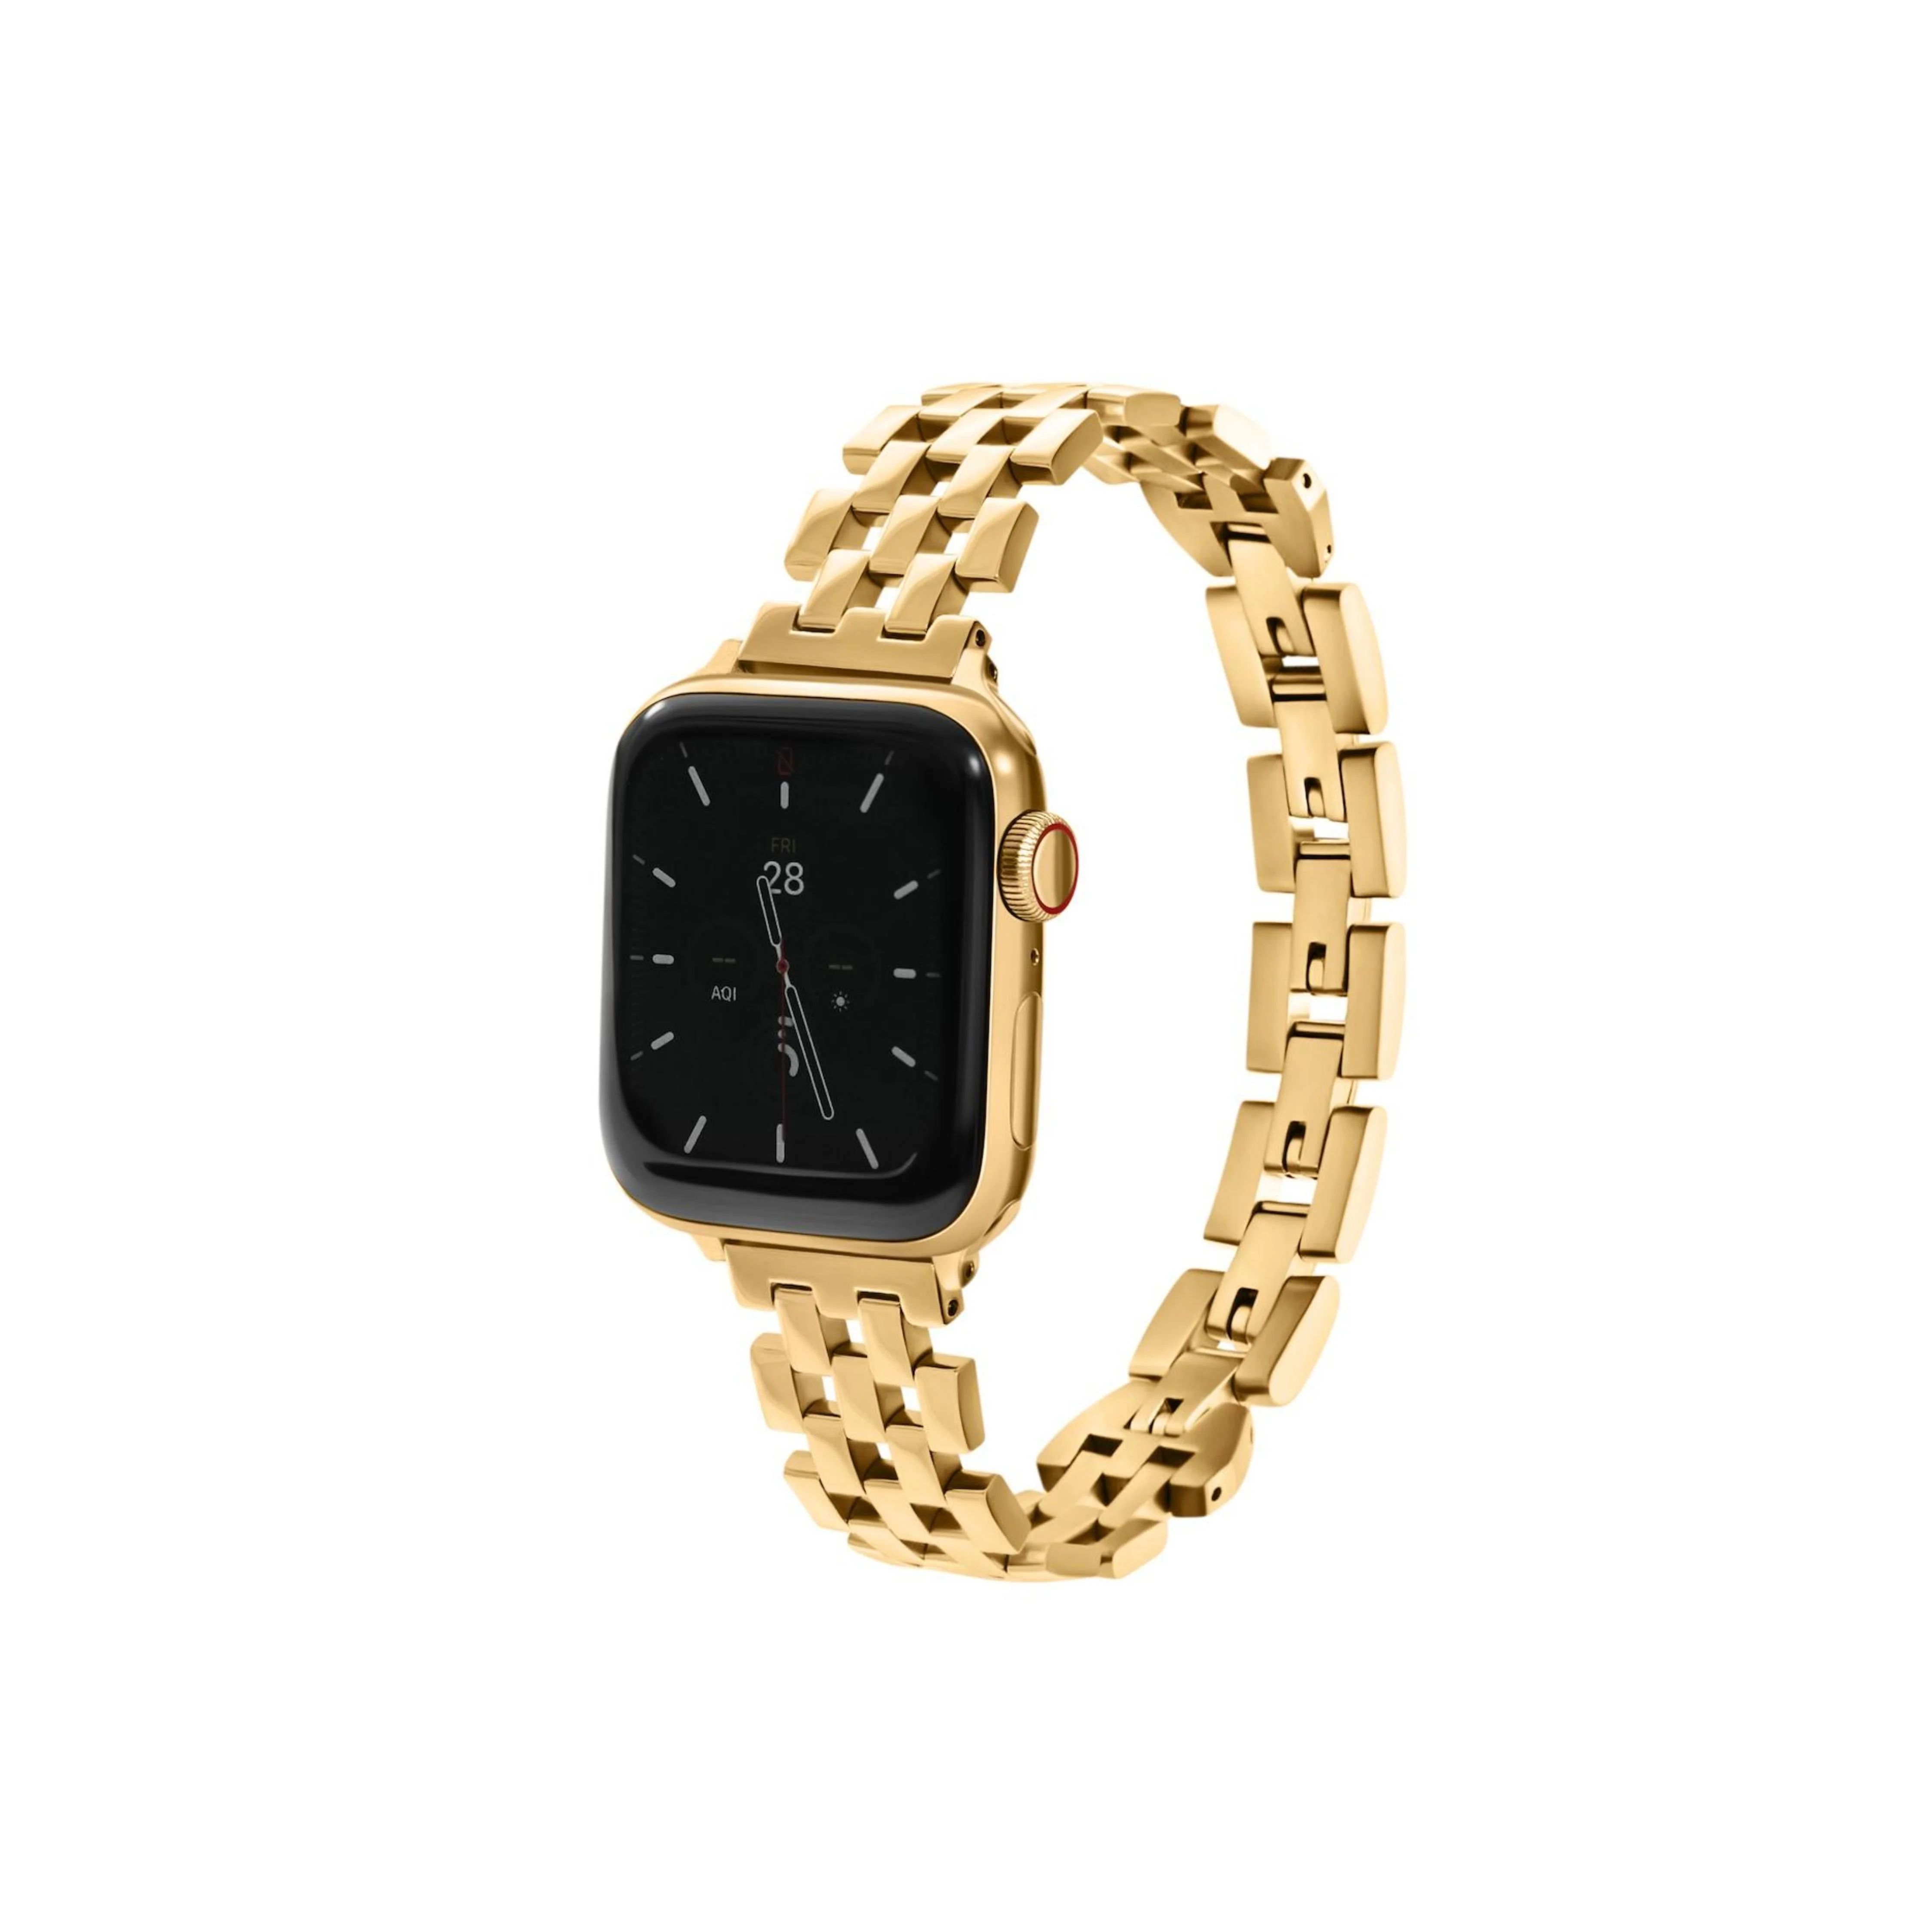 Basketweave Band for the Apple Watch | Goldenerre